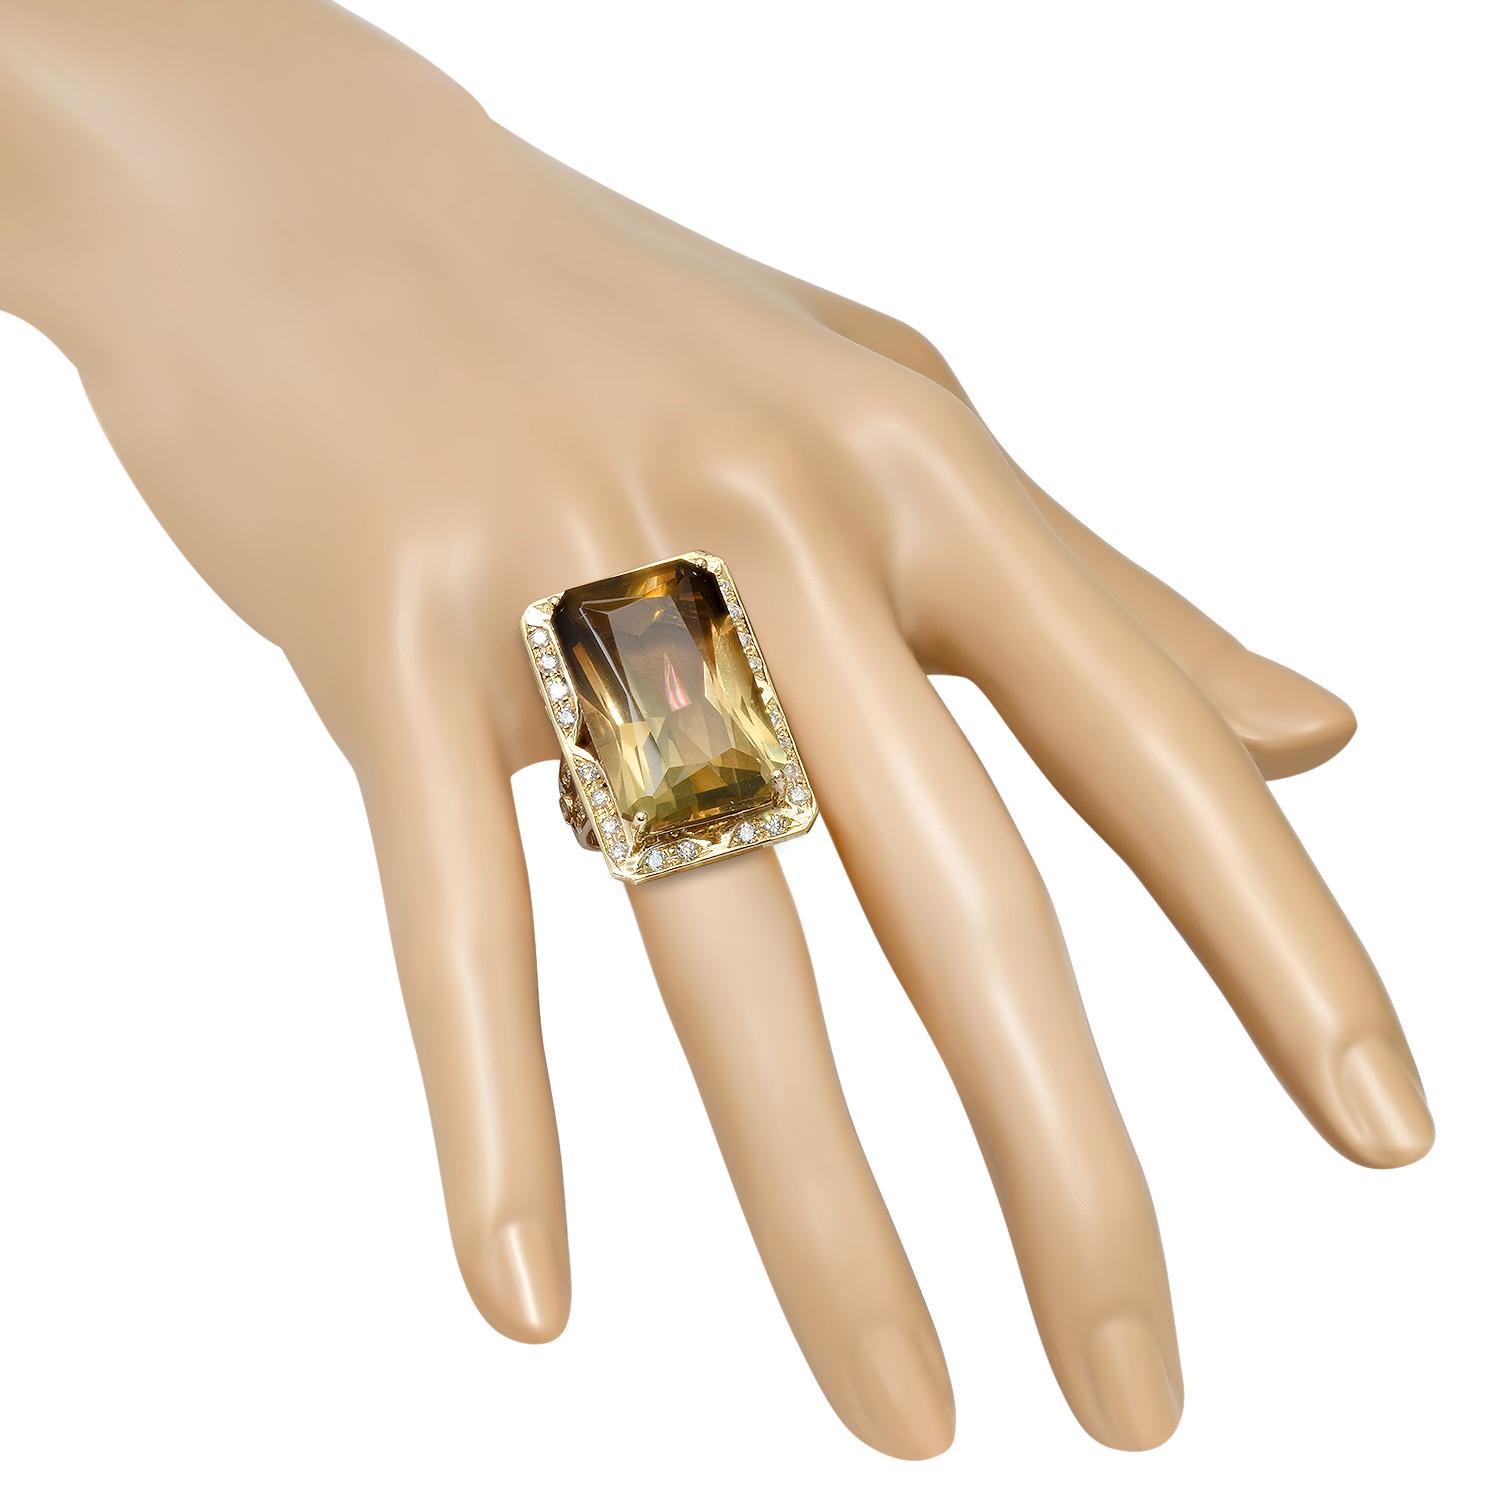 14K Yellow Gold Setting with 33.10ct Citrine and 1.14ct Diamond Ring